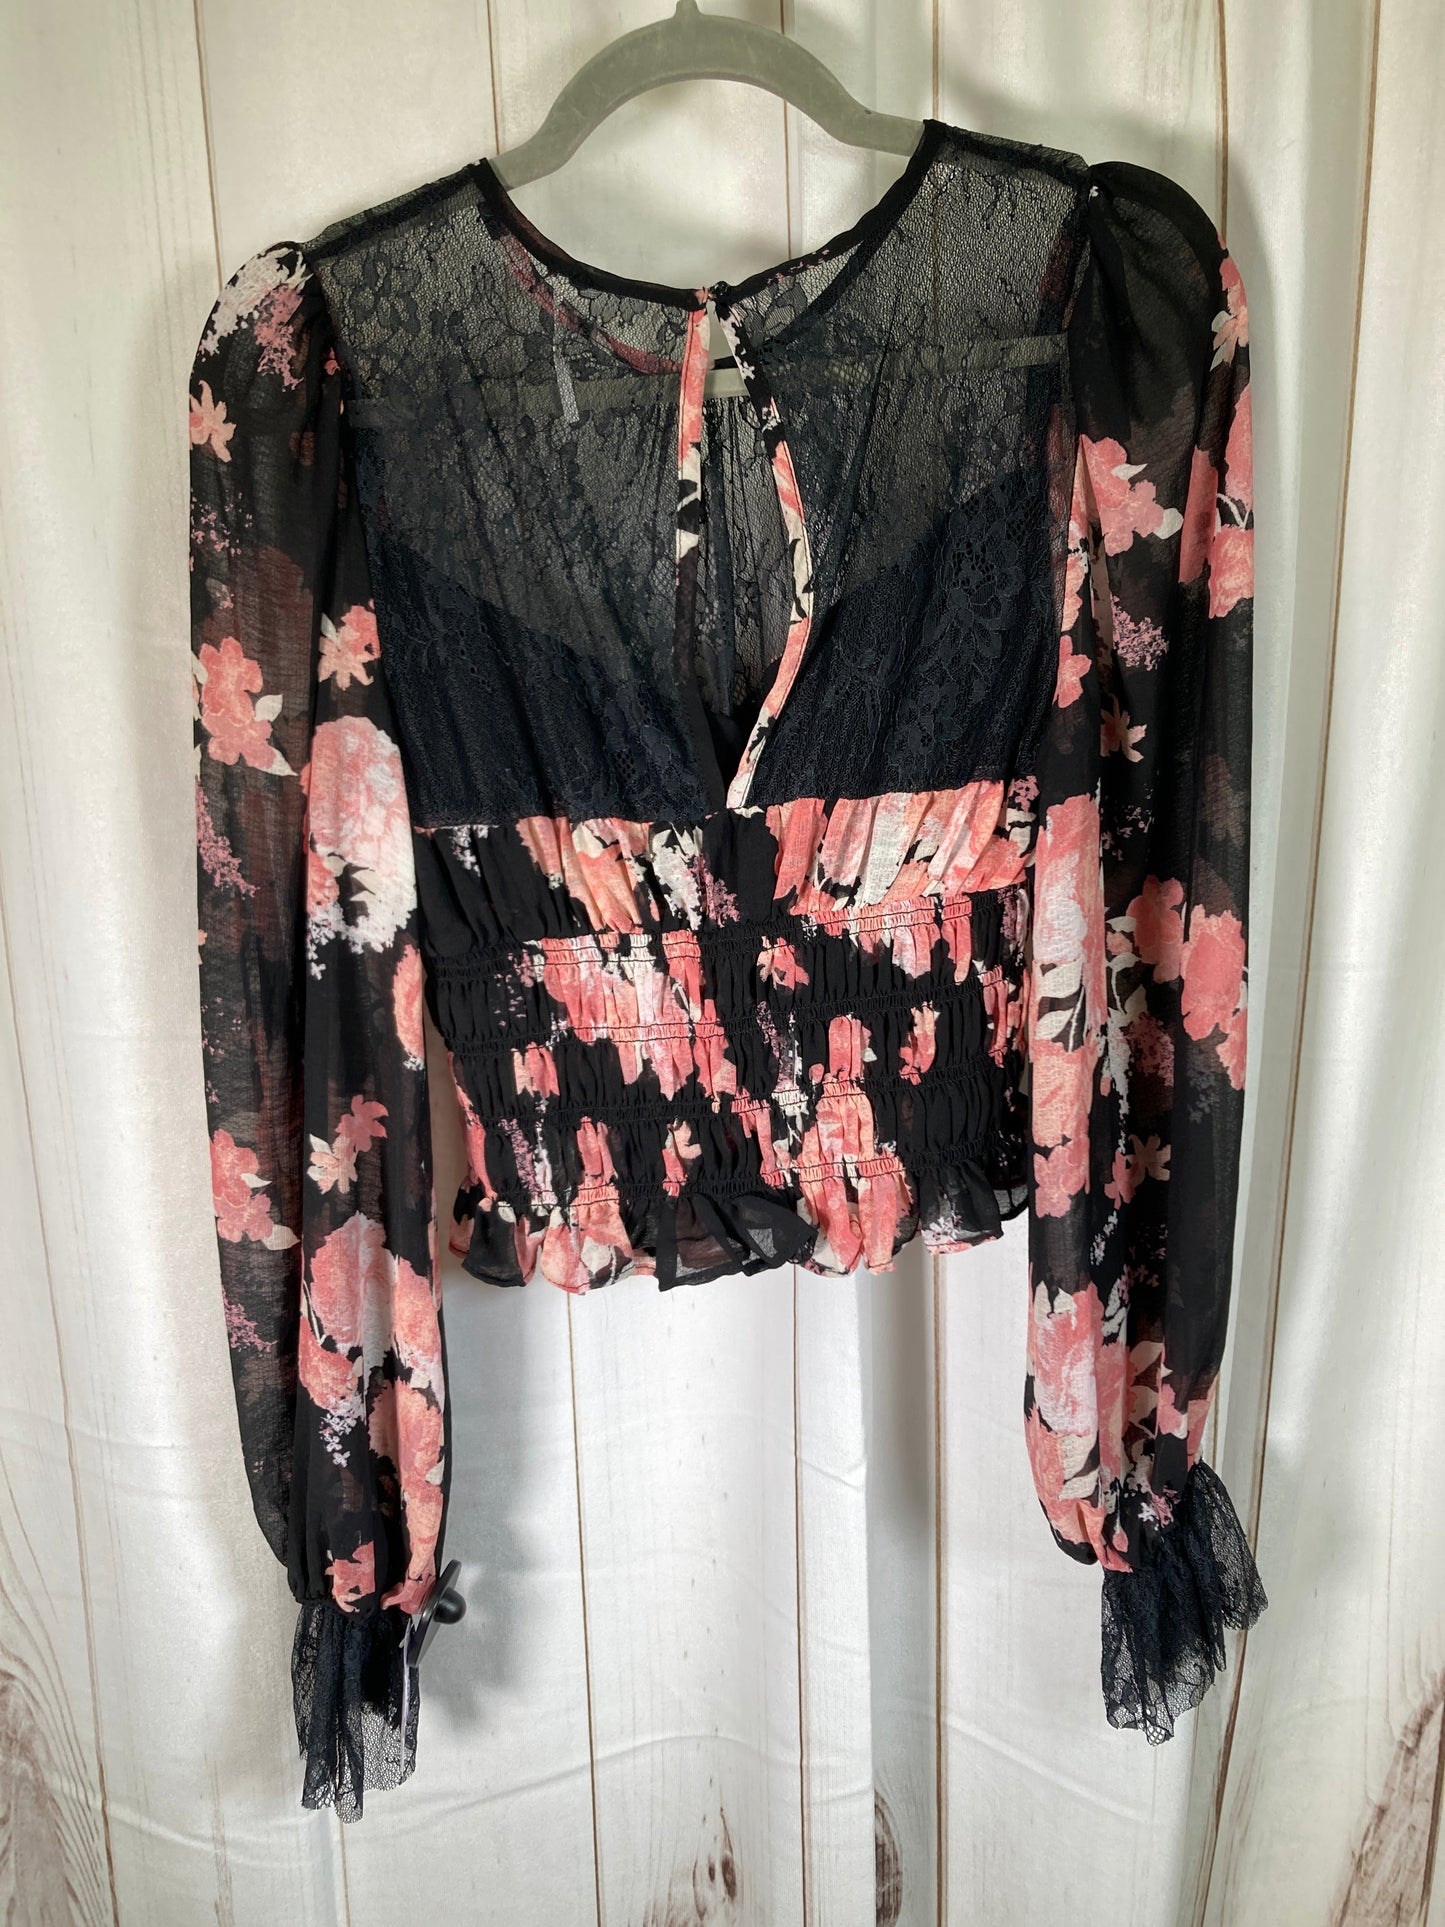 Black & Pink Top Long Sleeve Free People, Size S